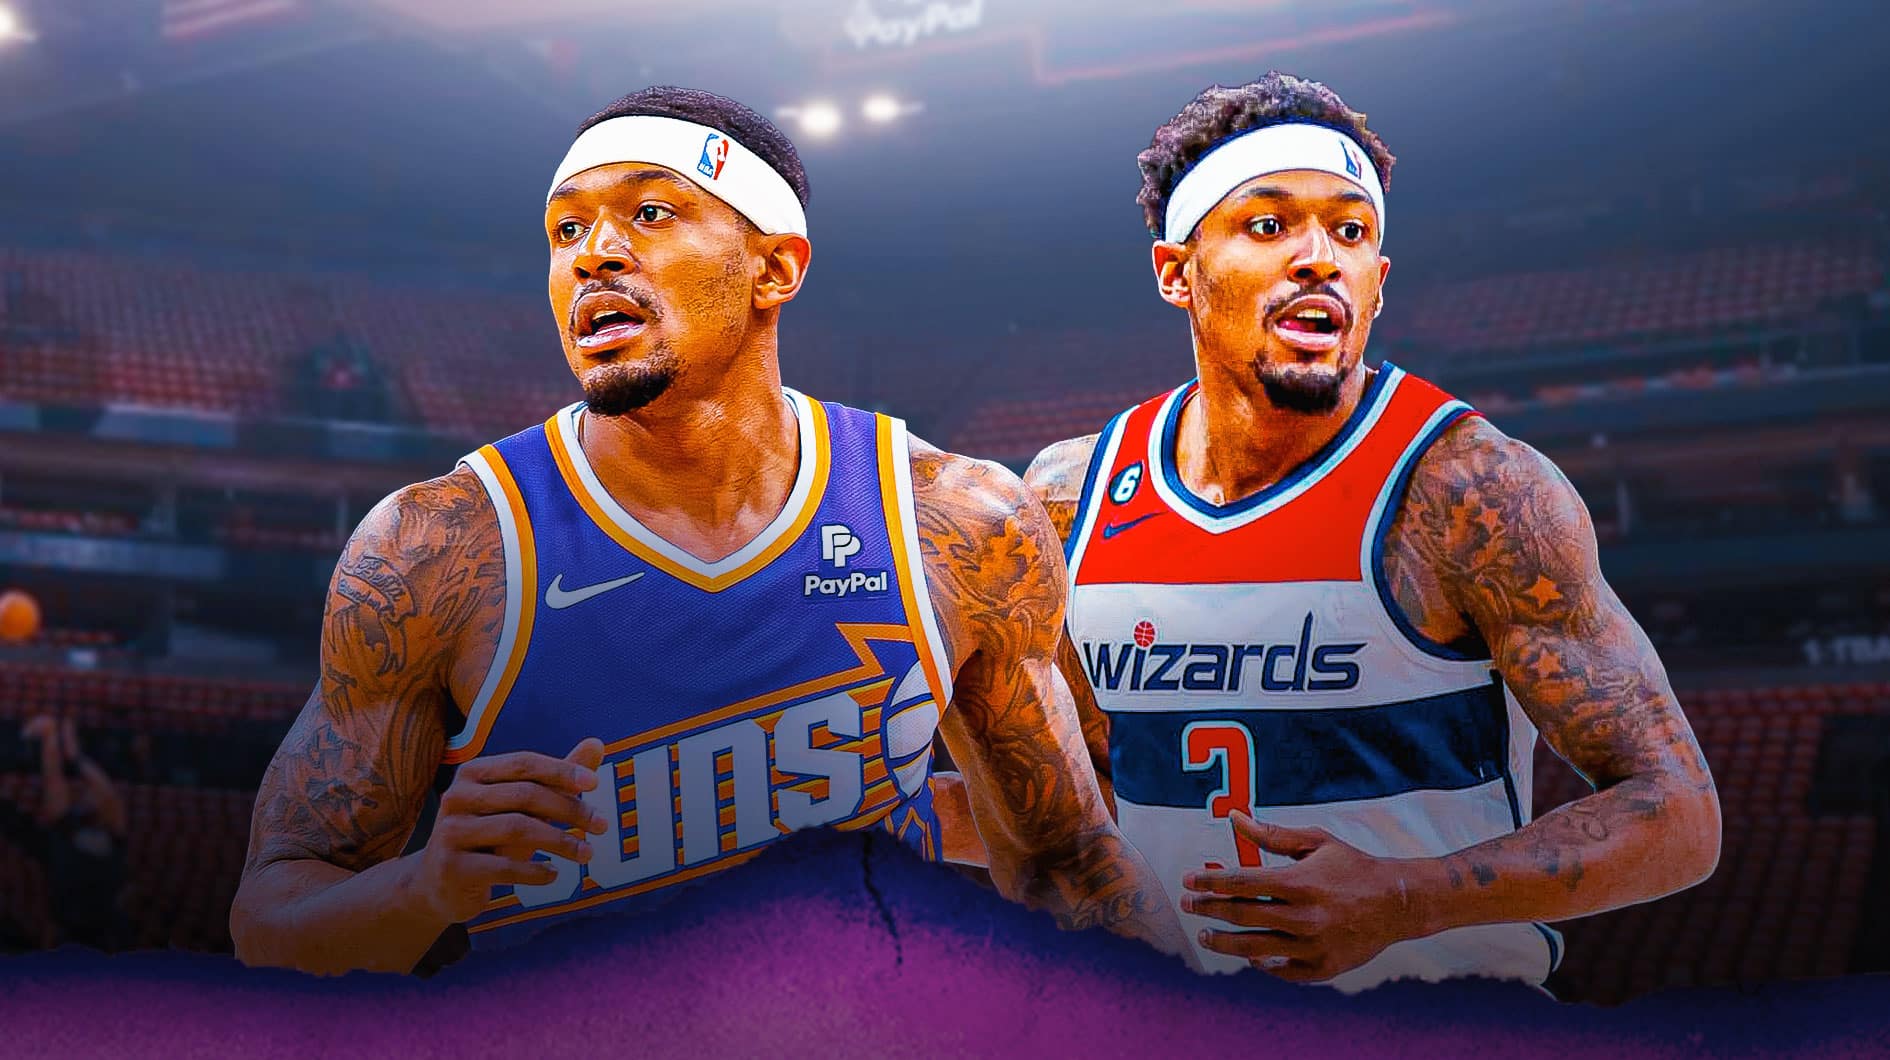 Bradley Beal playing for the Suns and the Wizards.